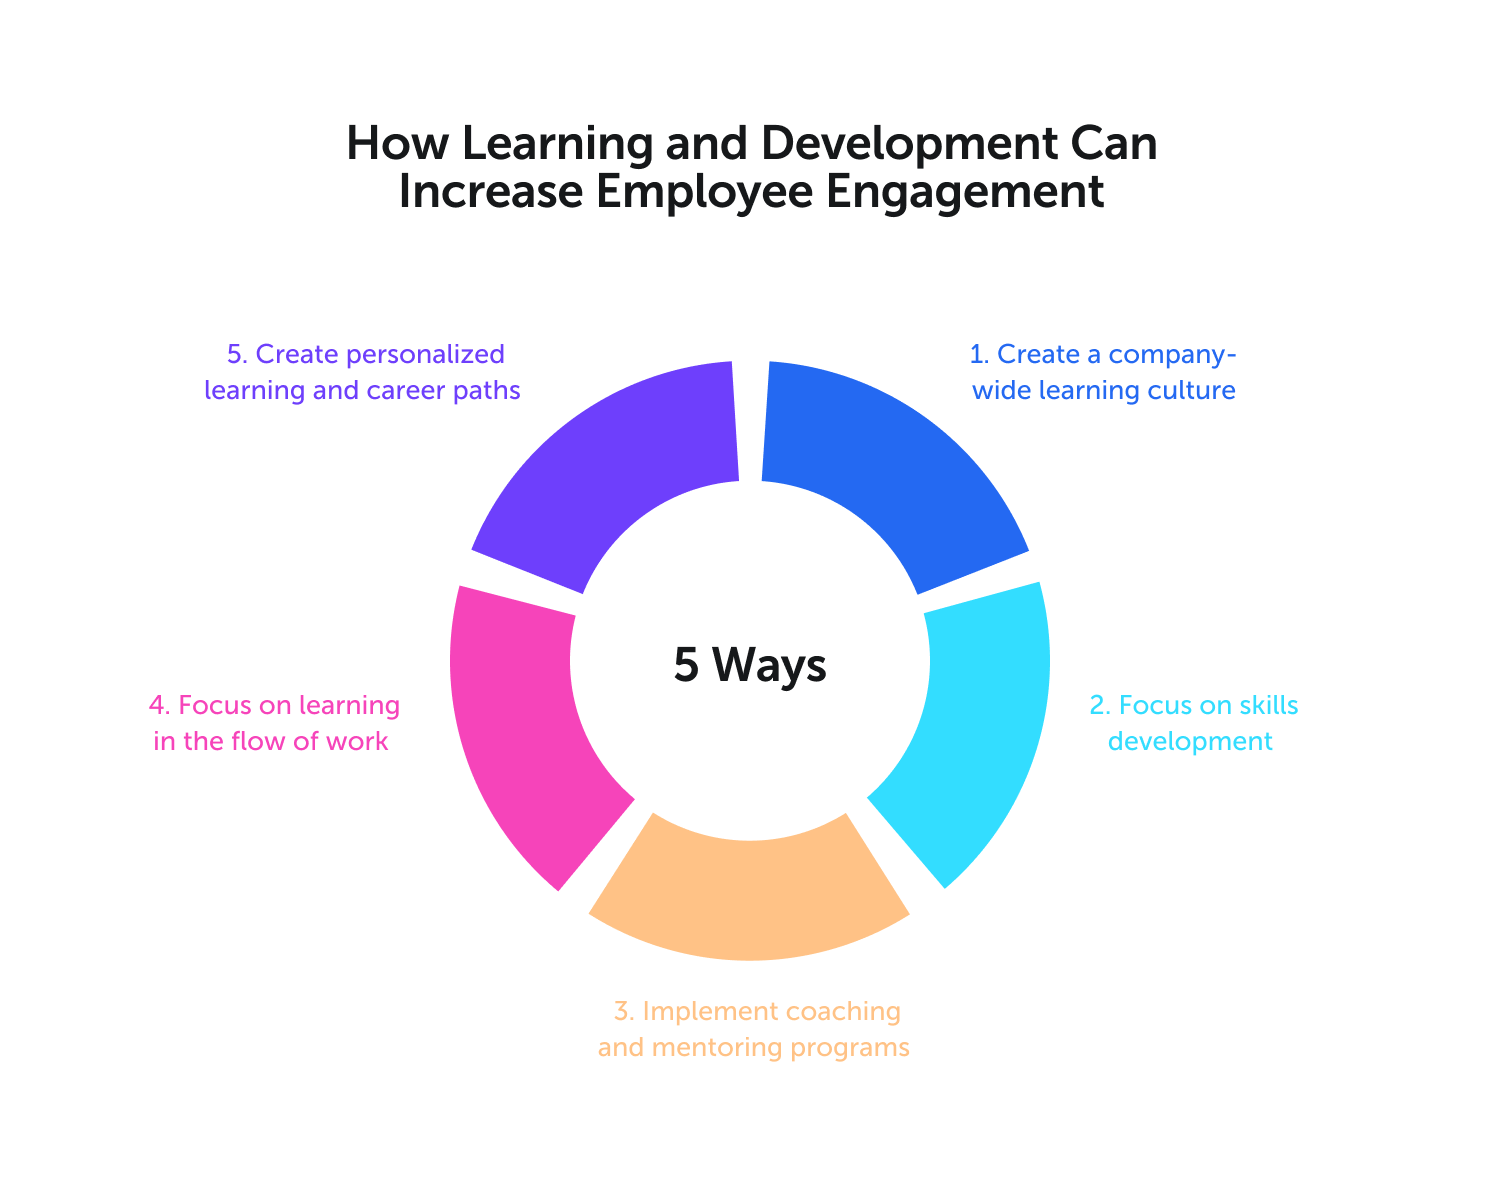 5 ways on how learning and development can increase employee engagement